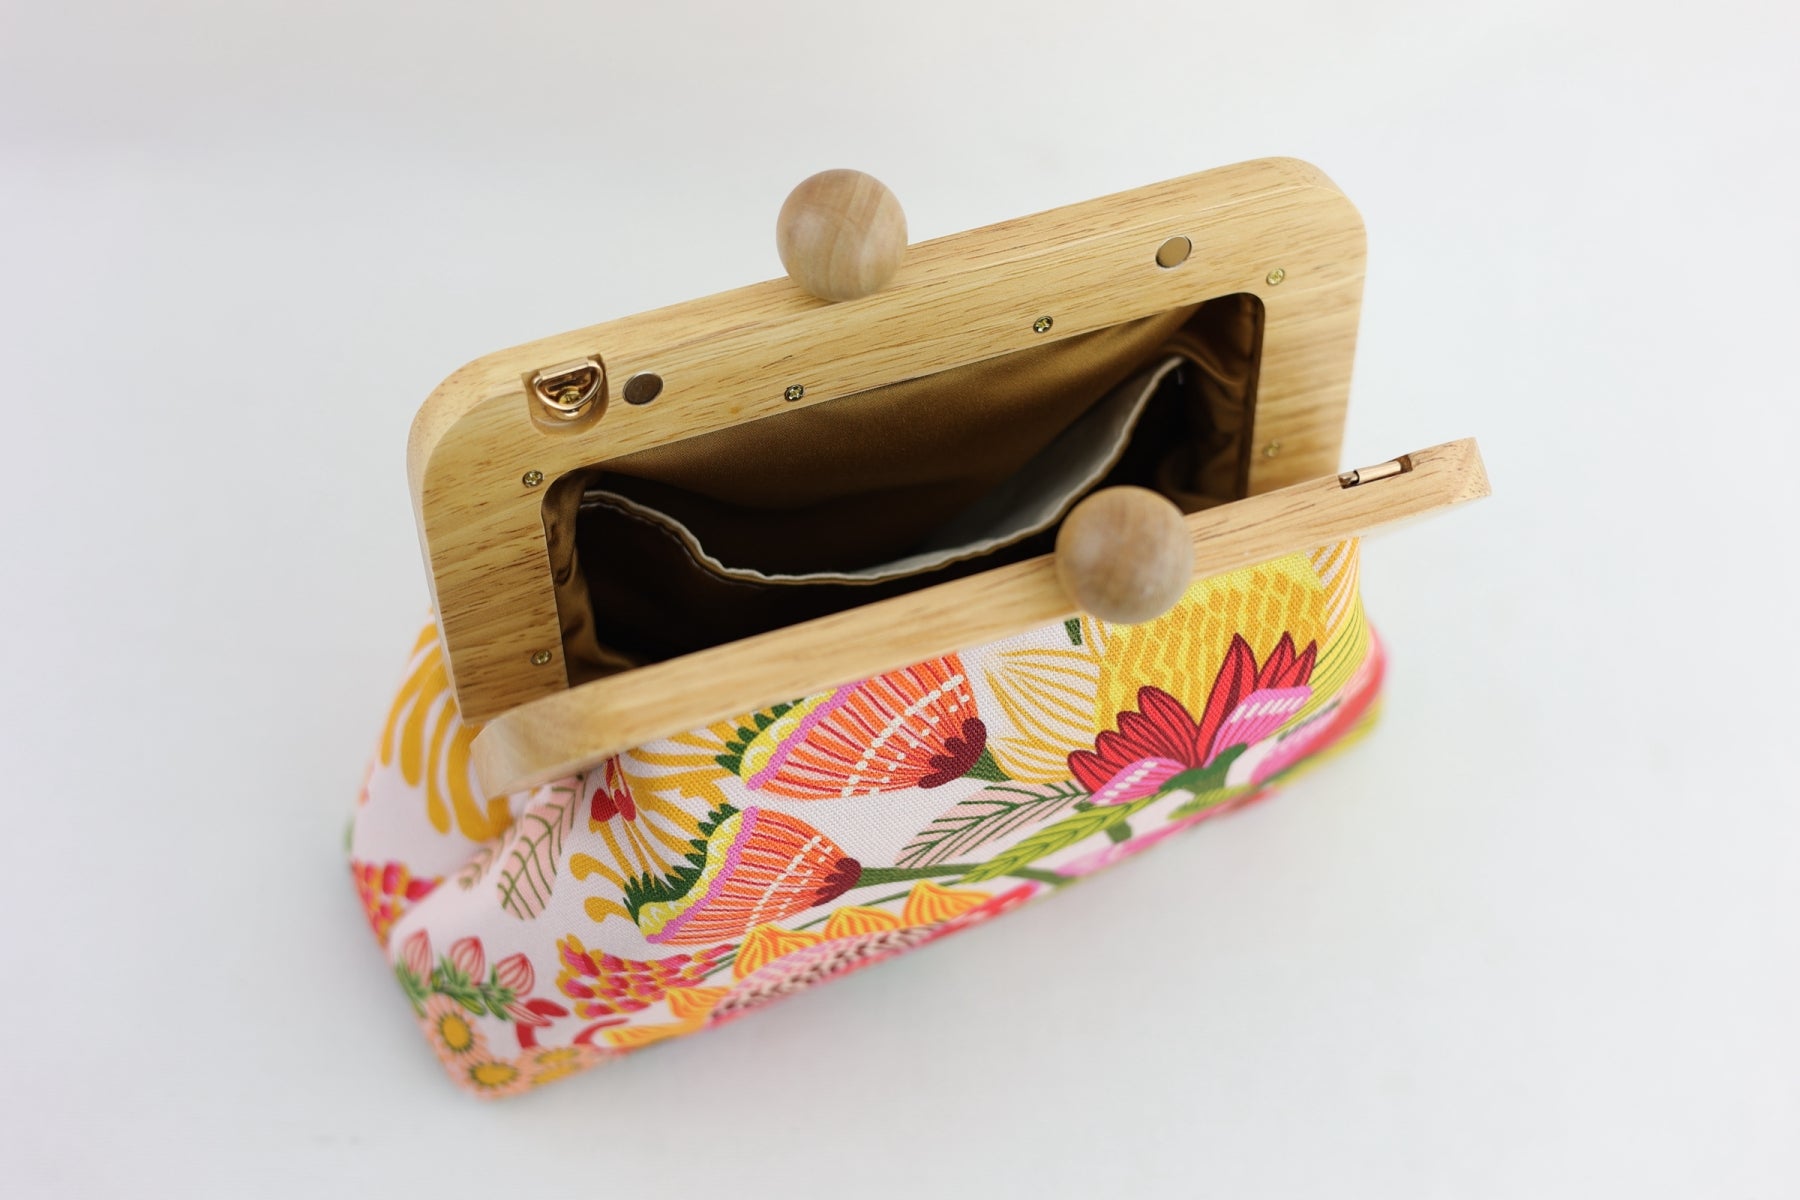 Wild Protea Flower Clutch with Leather Strap | PINK OASIS